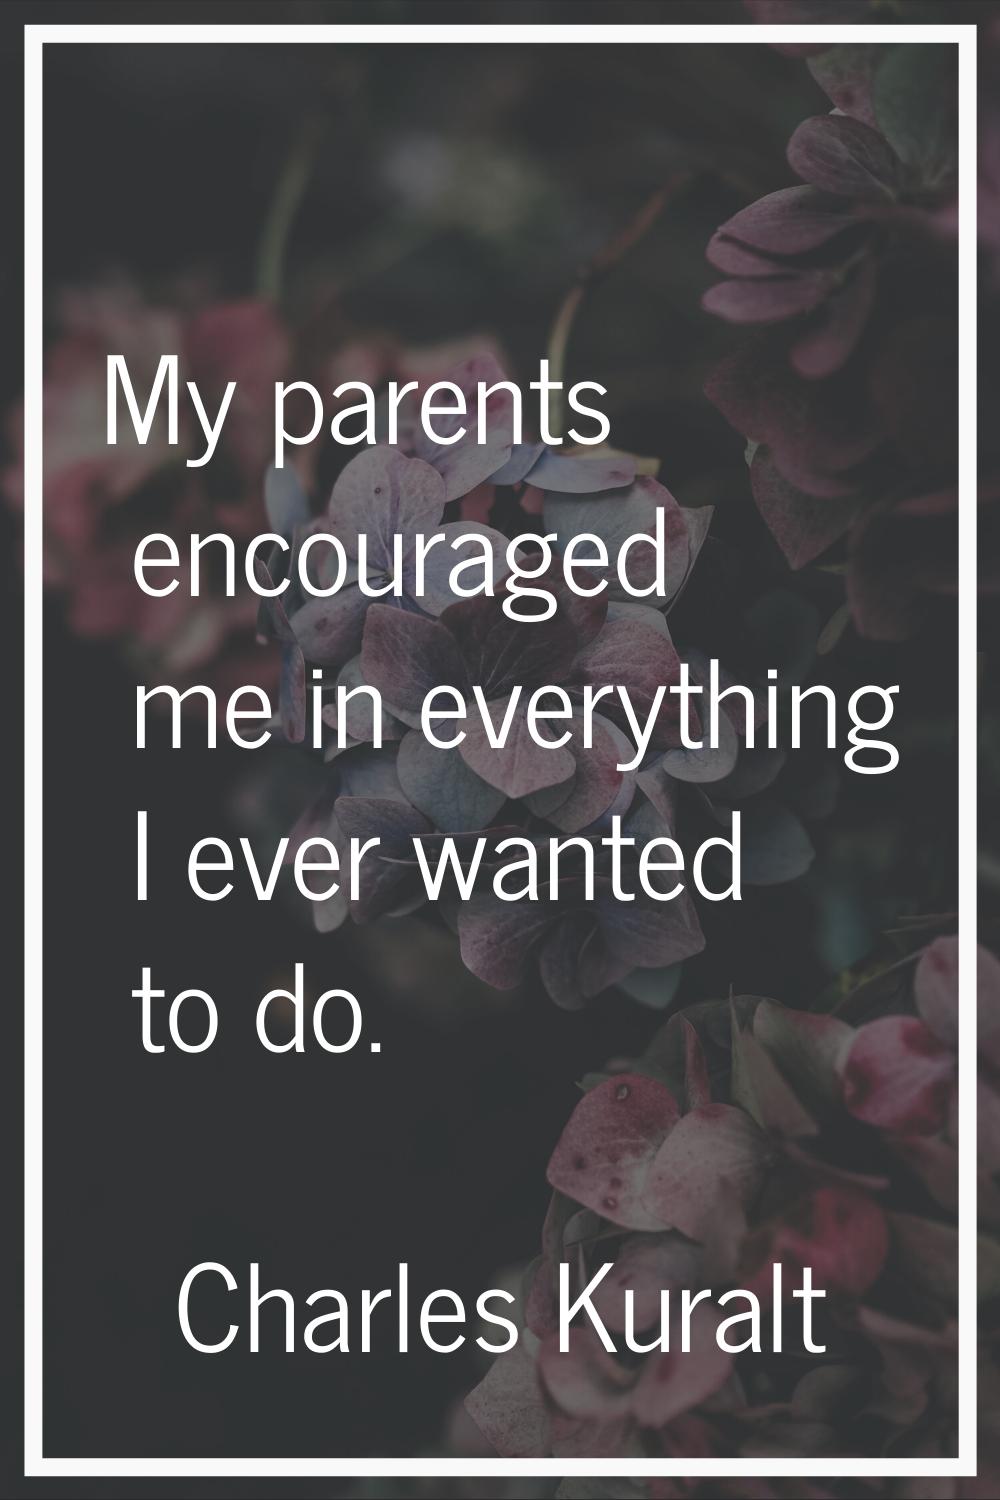 My parents encouraged me in everything I ever wanted to do.